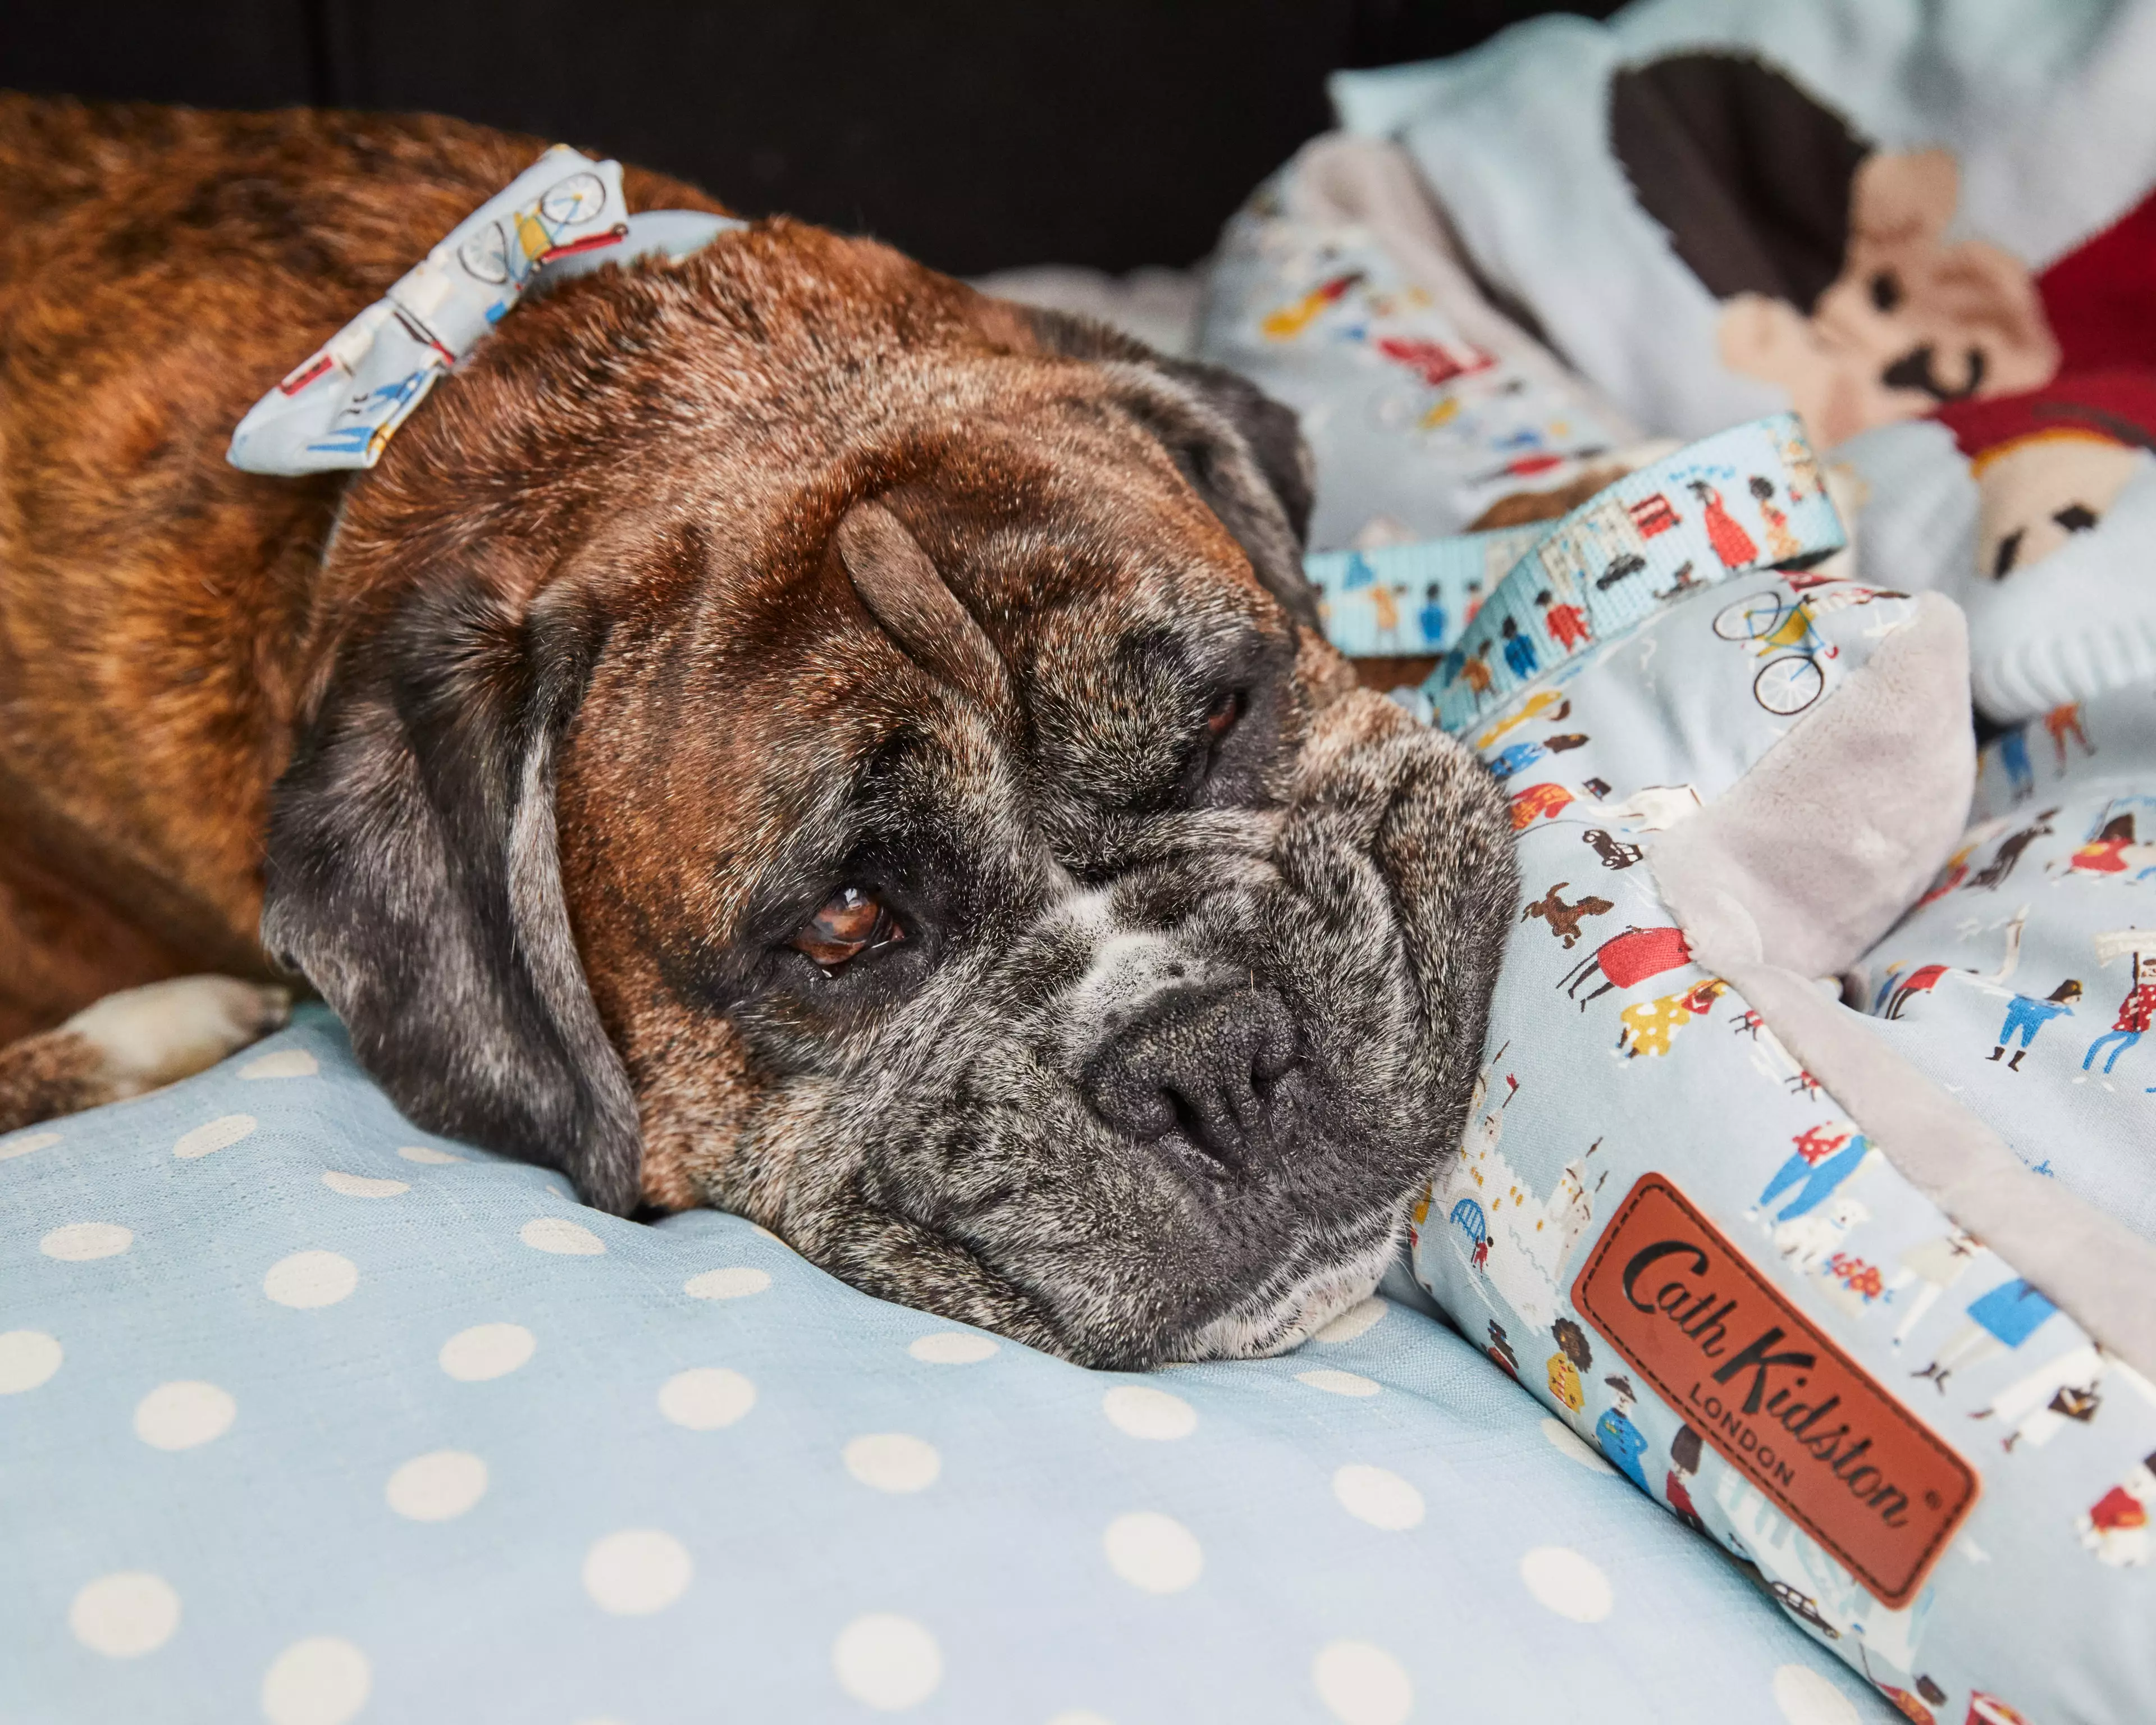 Cath Kidston has launched a nationwide search to find a dog to model its 2021 collection (